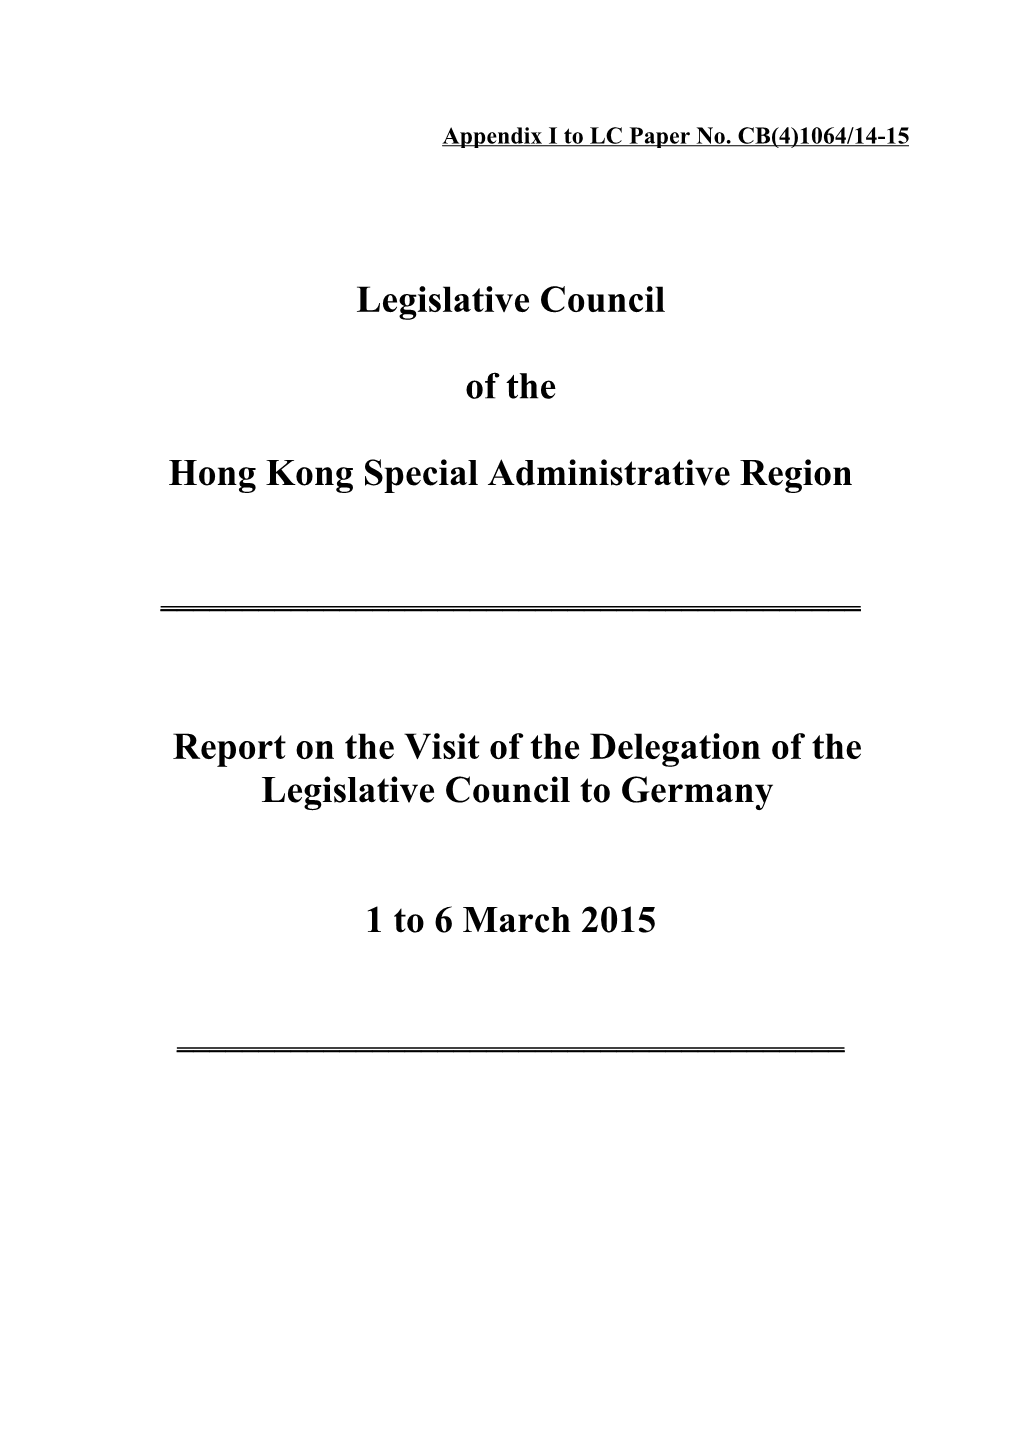 Report on the Visit of the Legislative Council Delegation to Germany to the House Committee Meeting